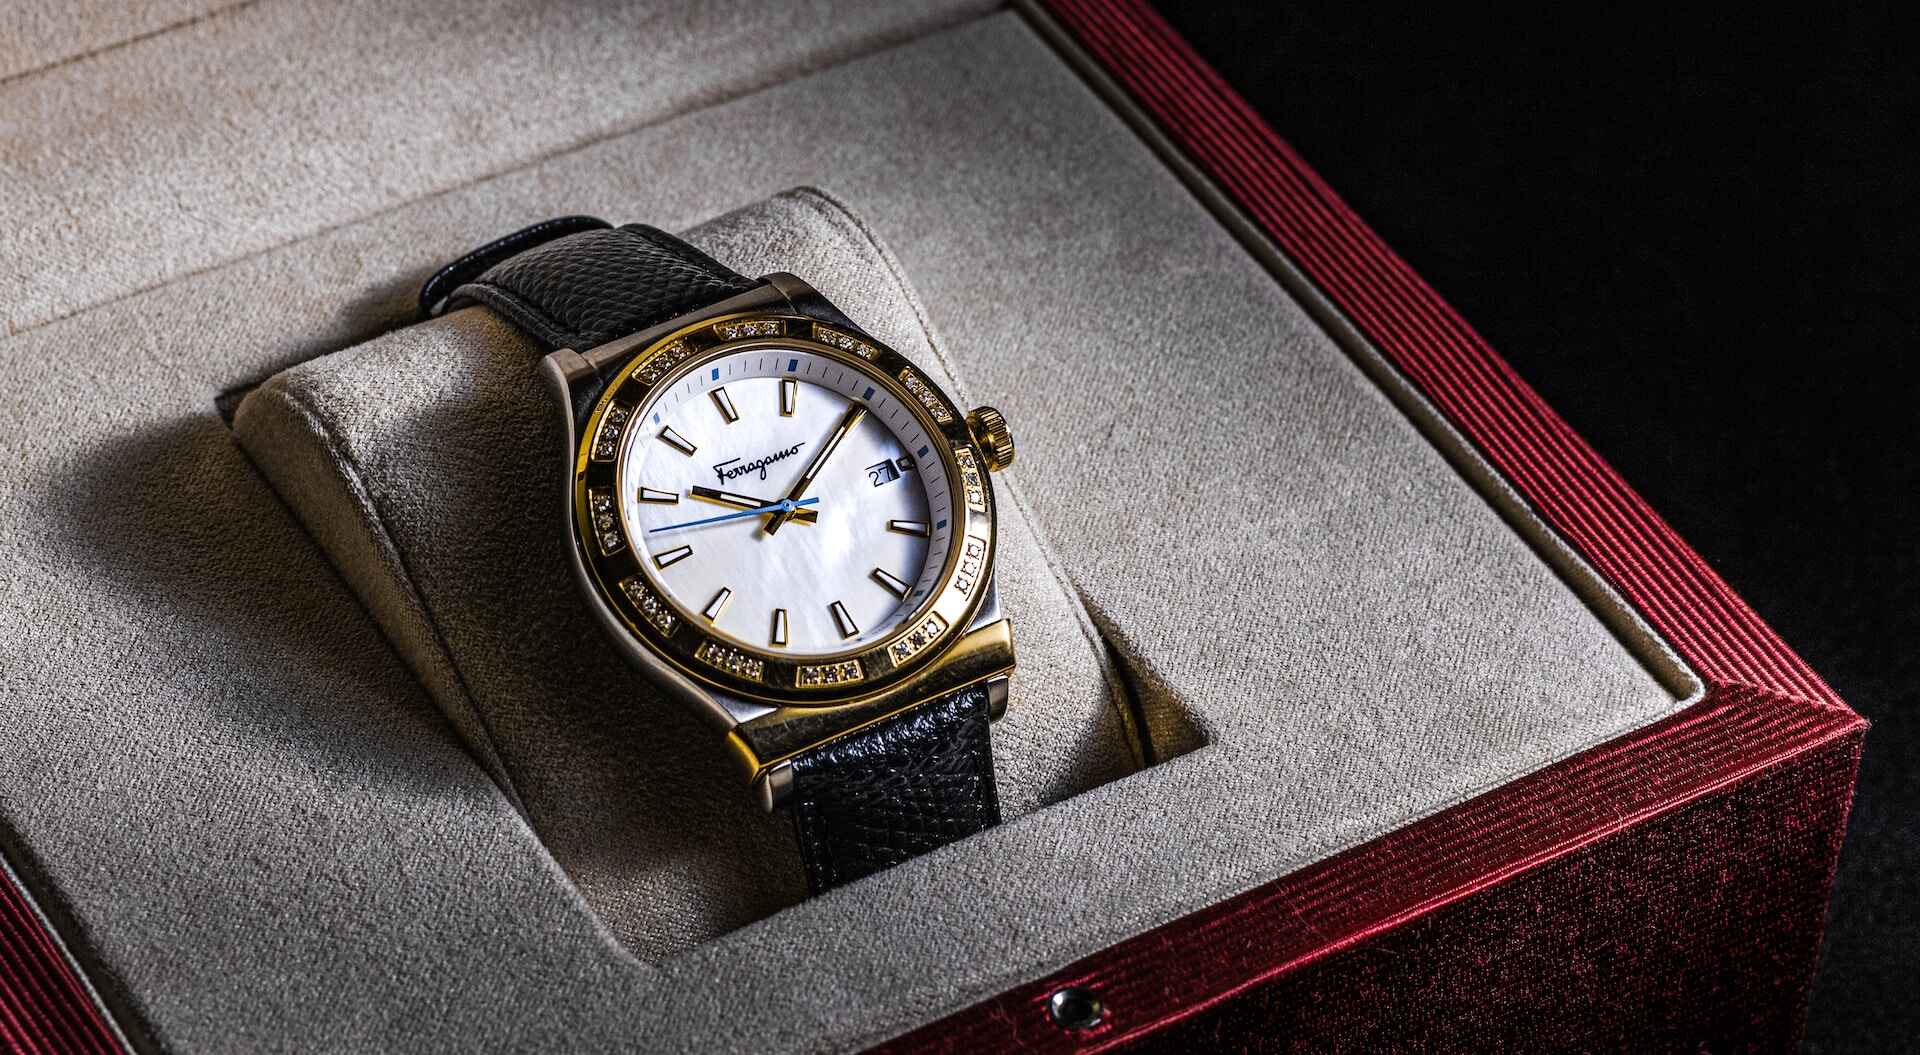 expensive watch in a custom watch box